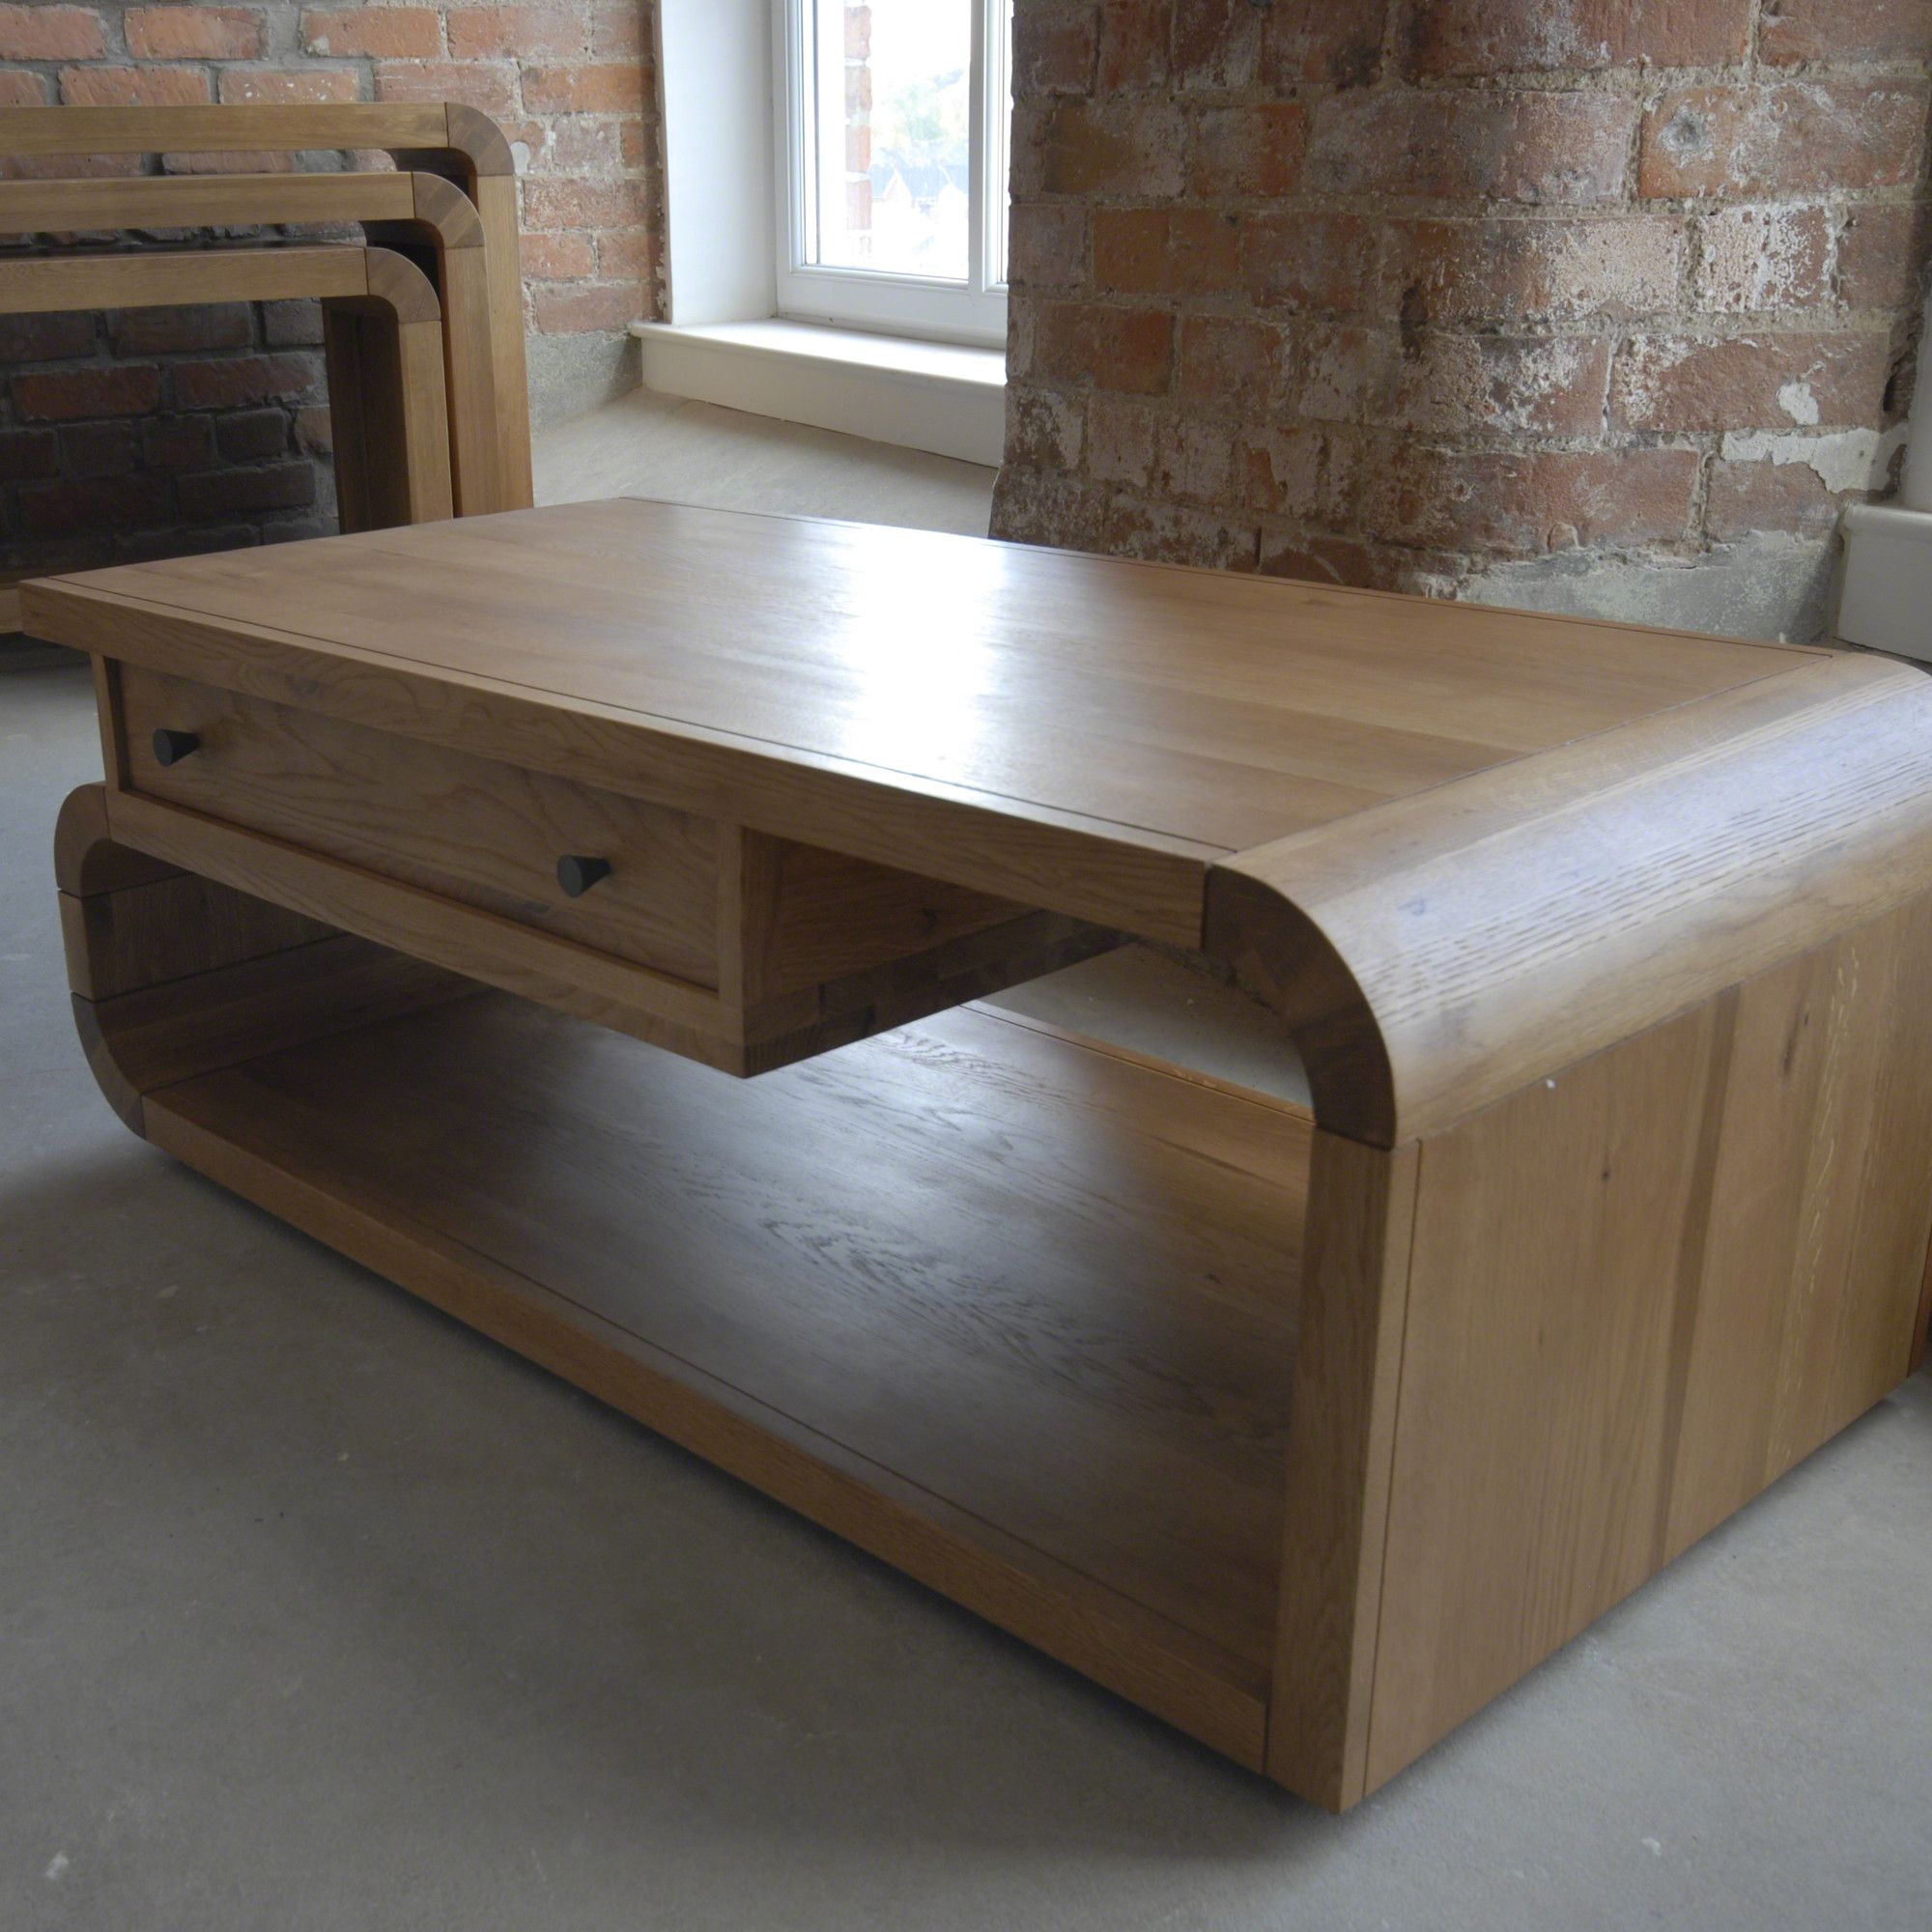 Oceans Apart Cadence Oak Living Coffee Table W/ Drawer at Tescos Direct